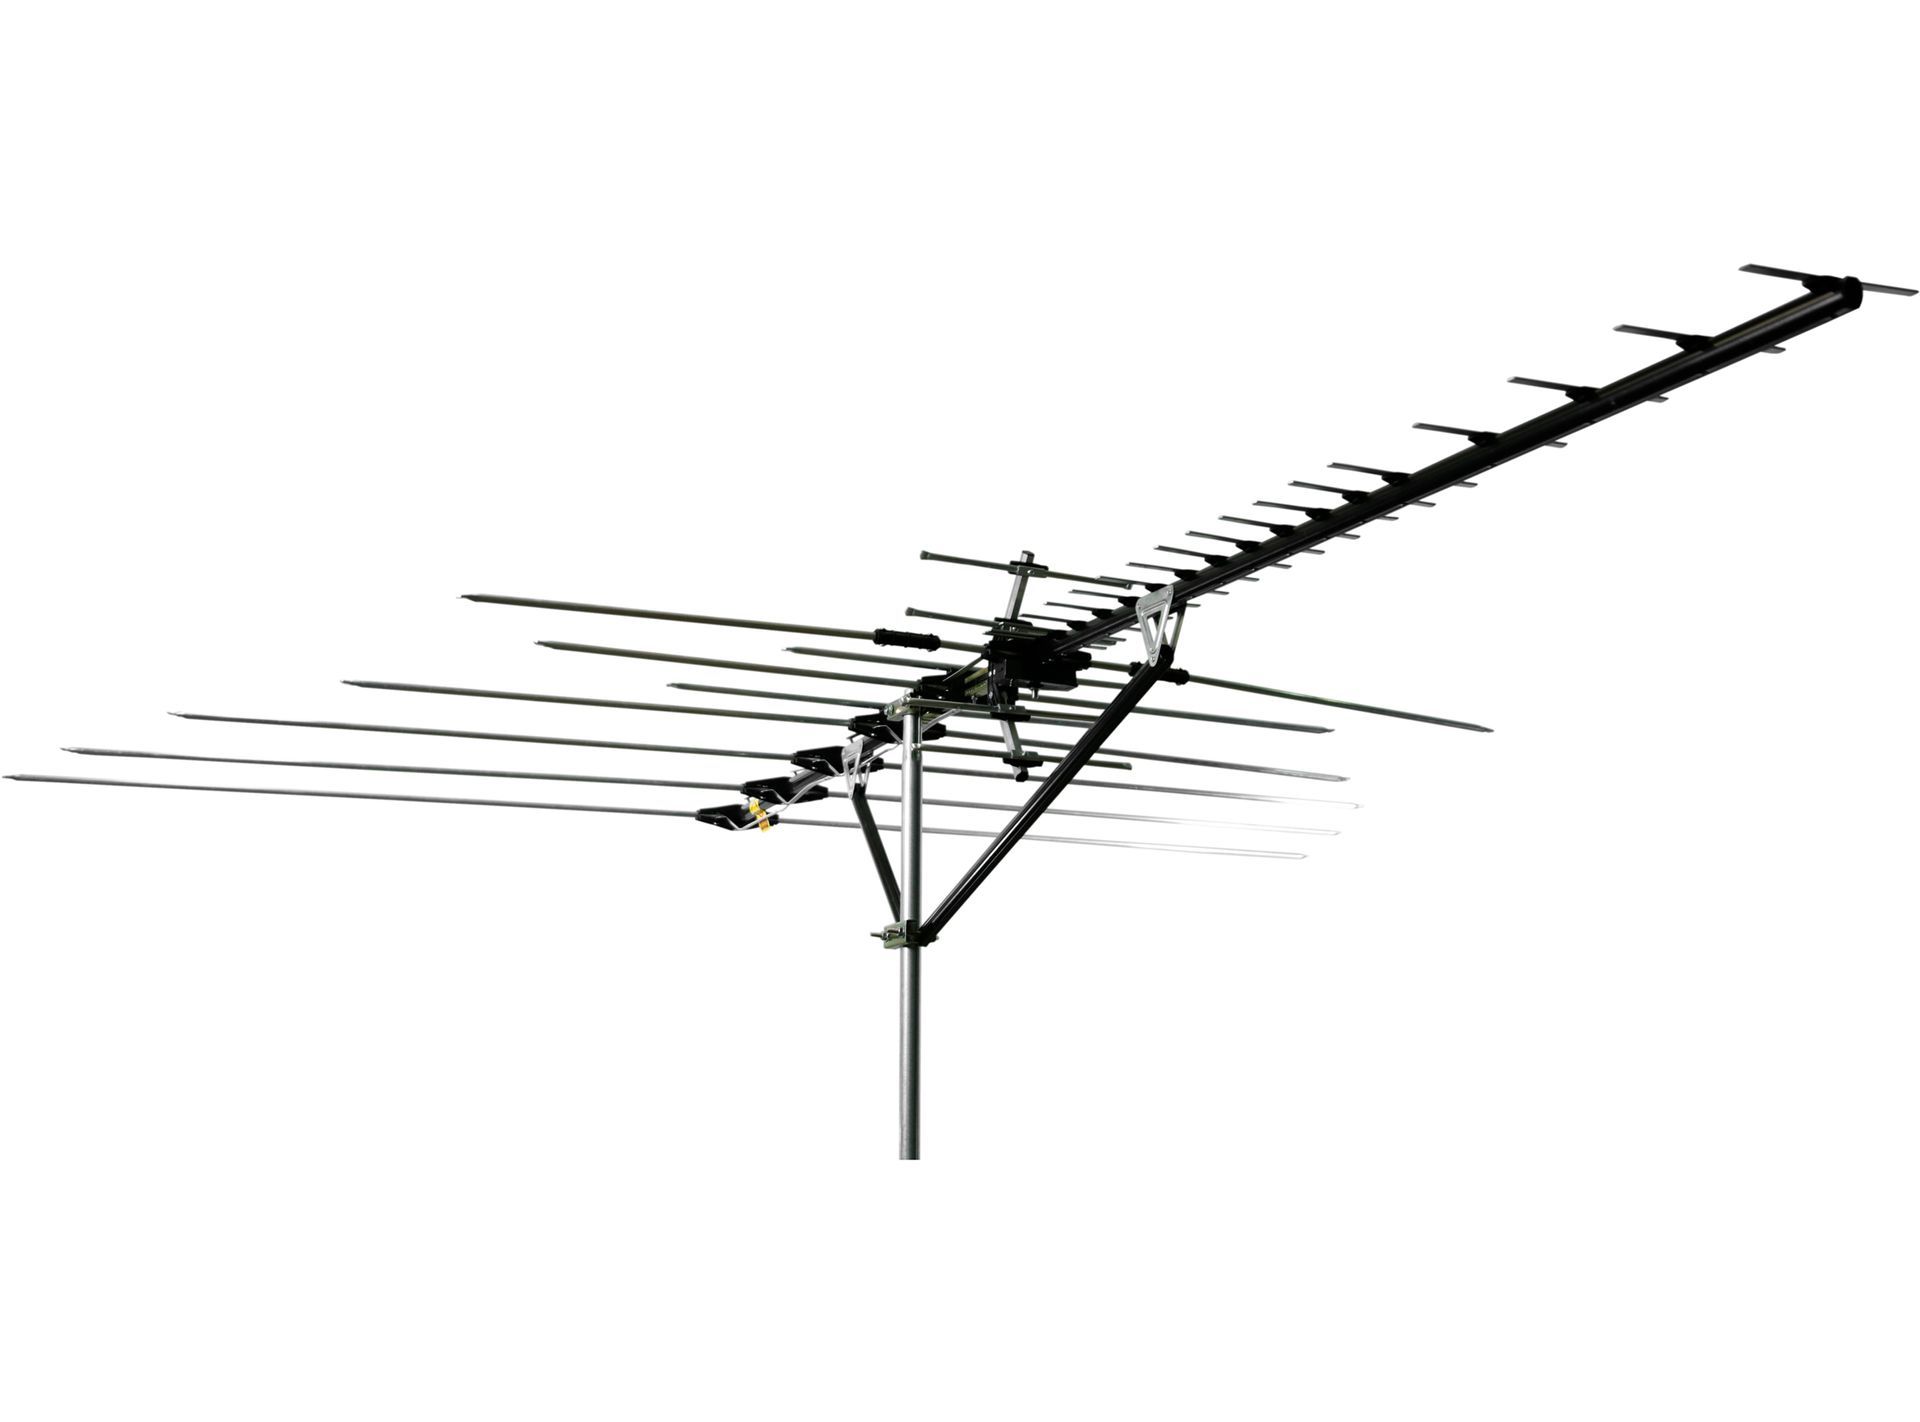 A large antenna is sitting on top of a pole on a white background.